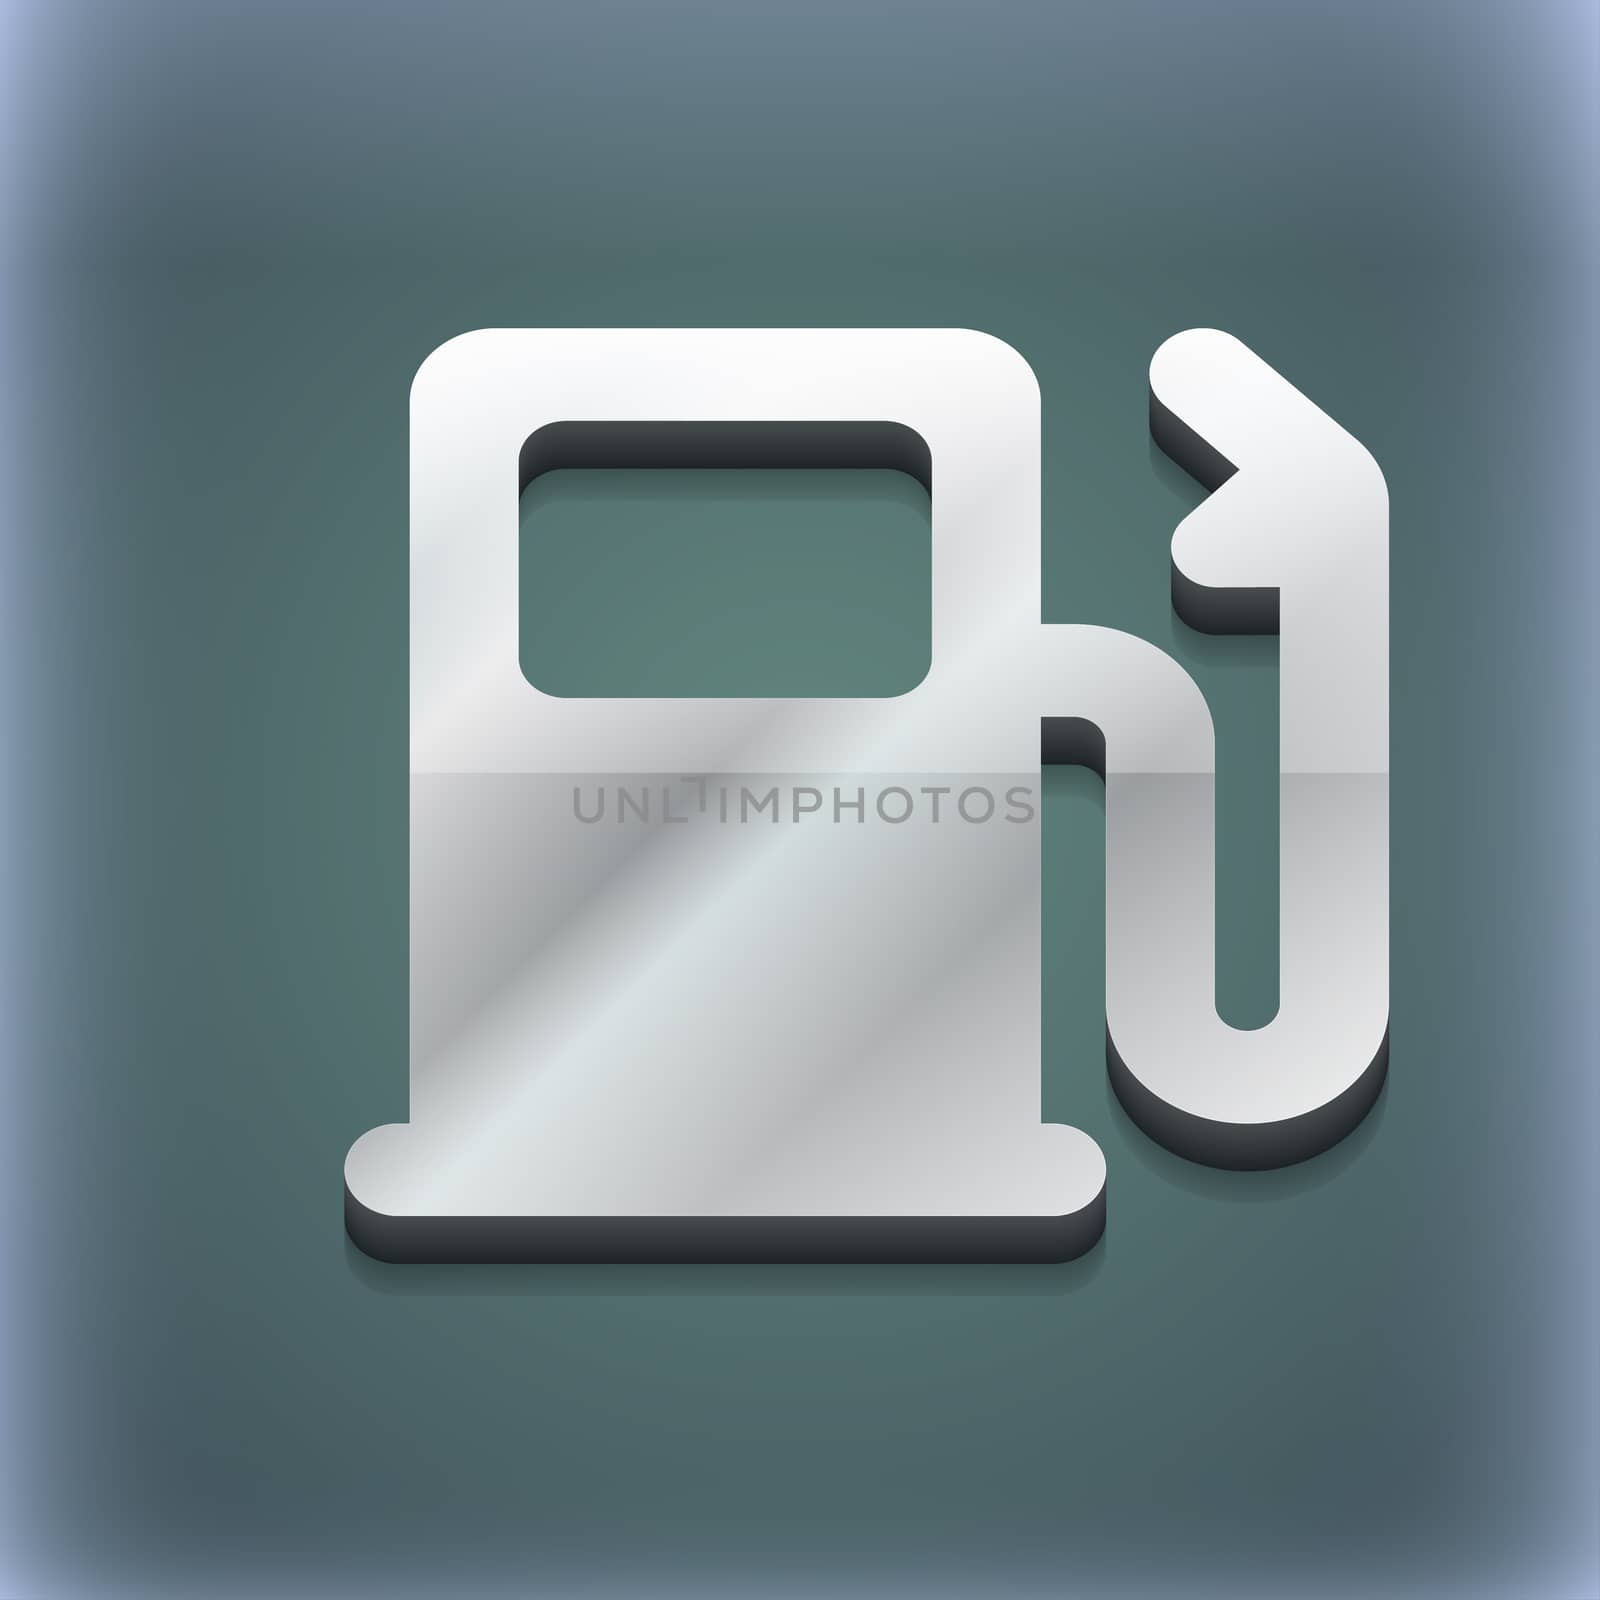 Petrol or Gas station, Car fuel icon symbol. 3D style. Trendy, modern design with space for your text illustration. Raster version